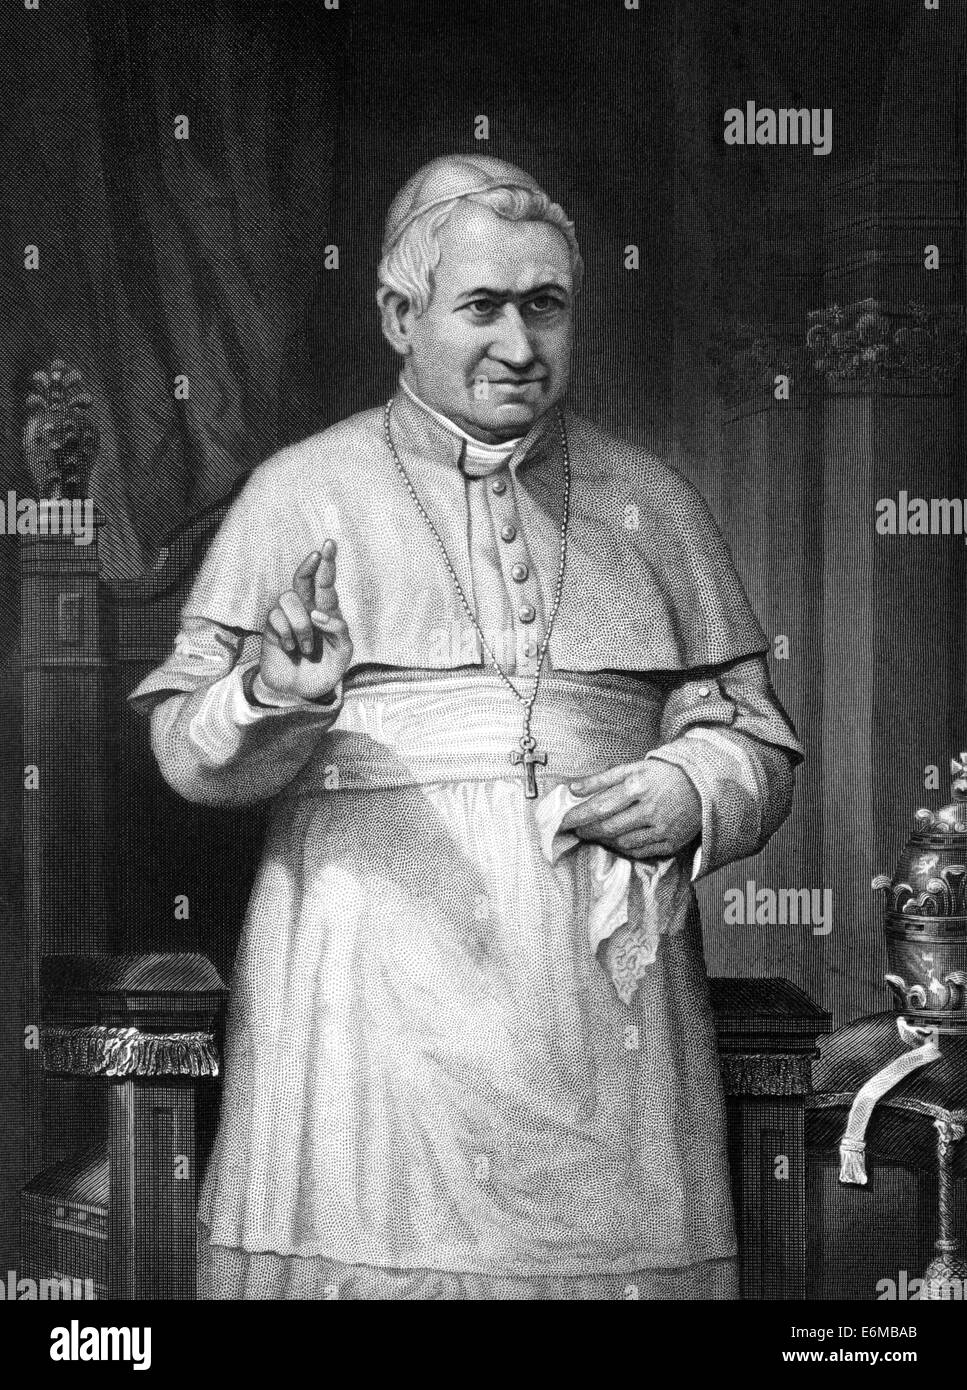 Pope Pius IX (1792-1878) on engraving from 1873. Born Giovanni Maria Mastai-Ferretti, was the longest reigning elected Pope in C Stock Photo